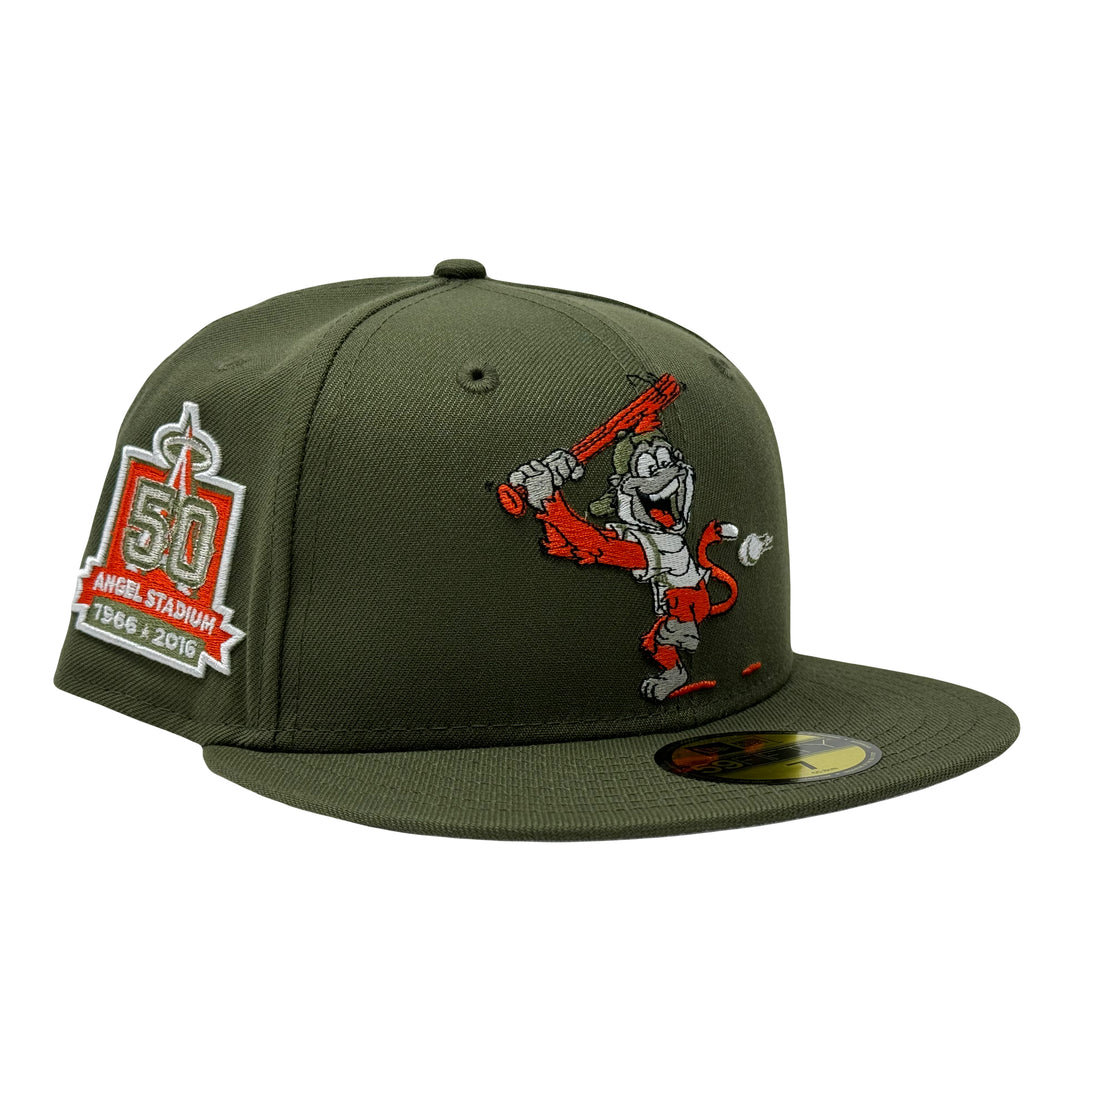 Los Angeles Angels 50th Anniversary Olive green Mascot Logo New Era Fitted Hat